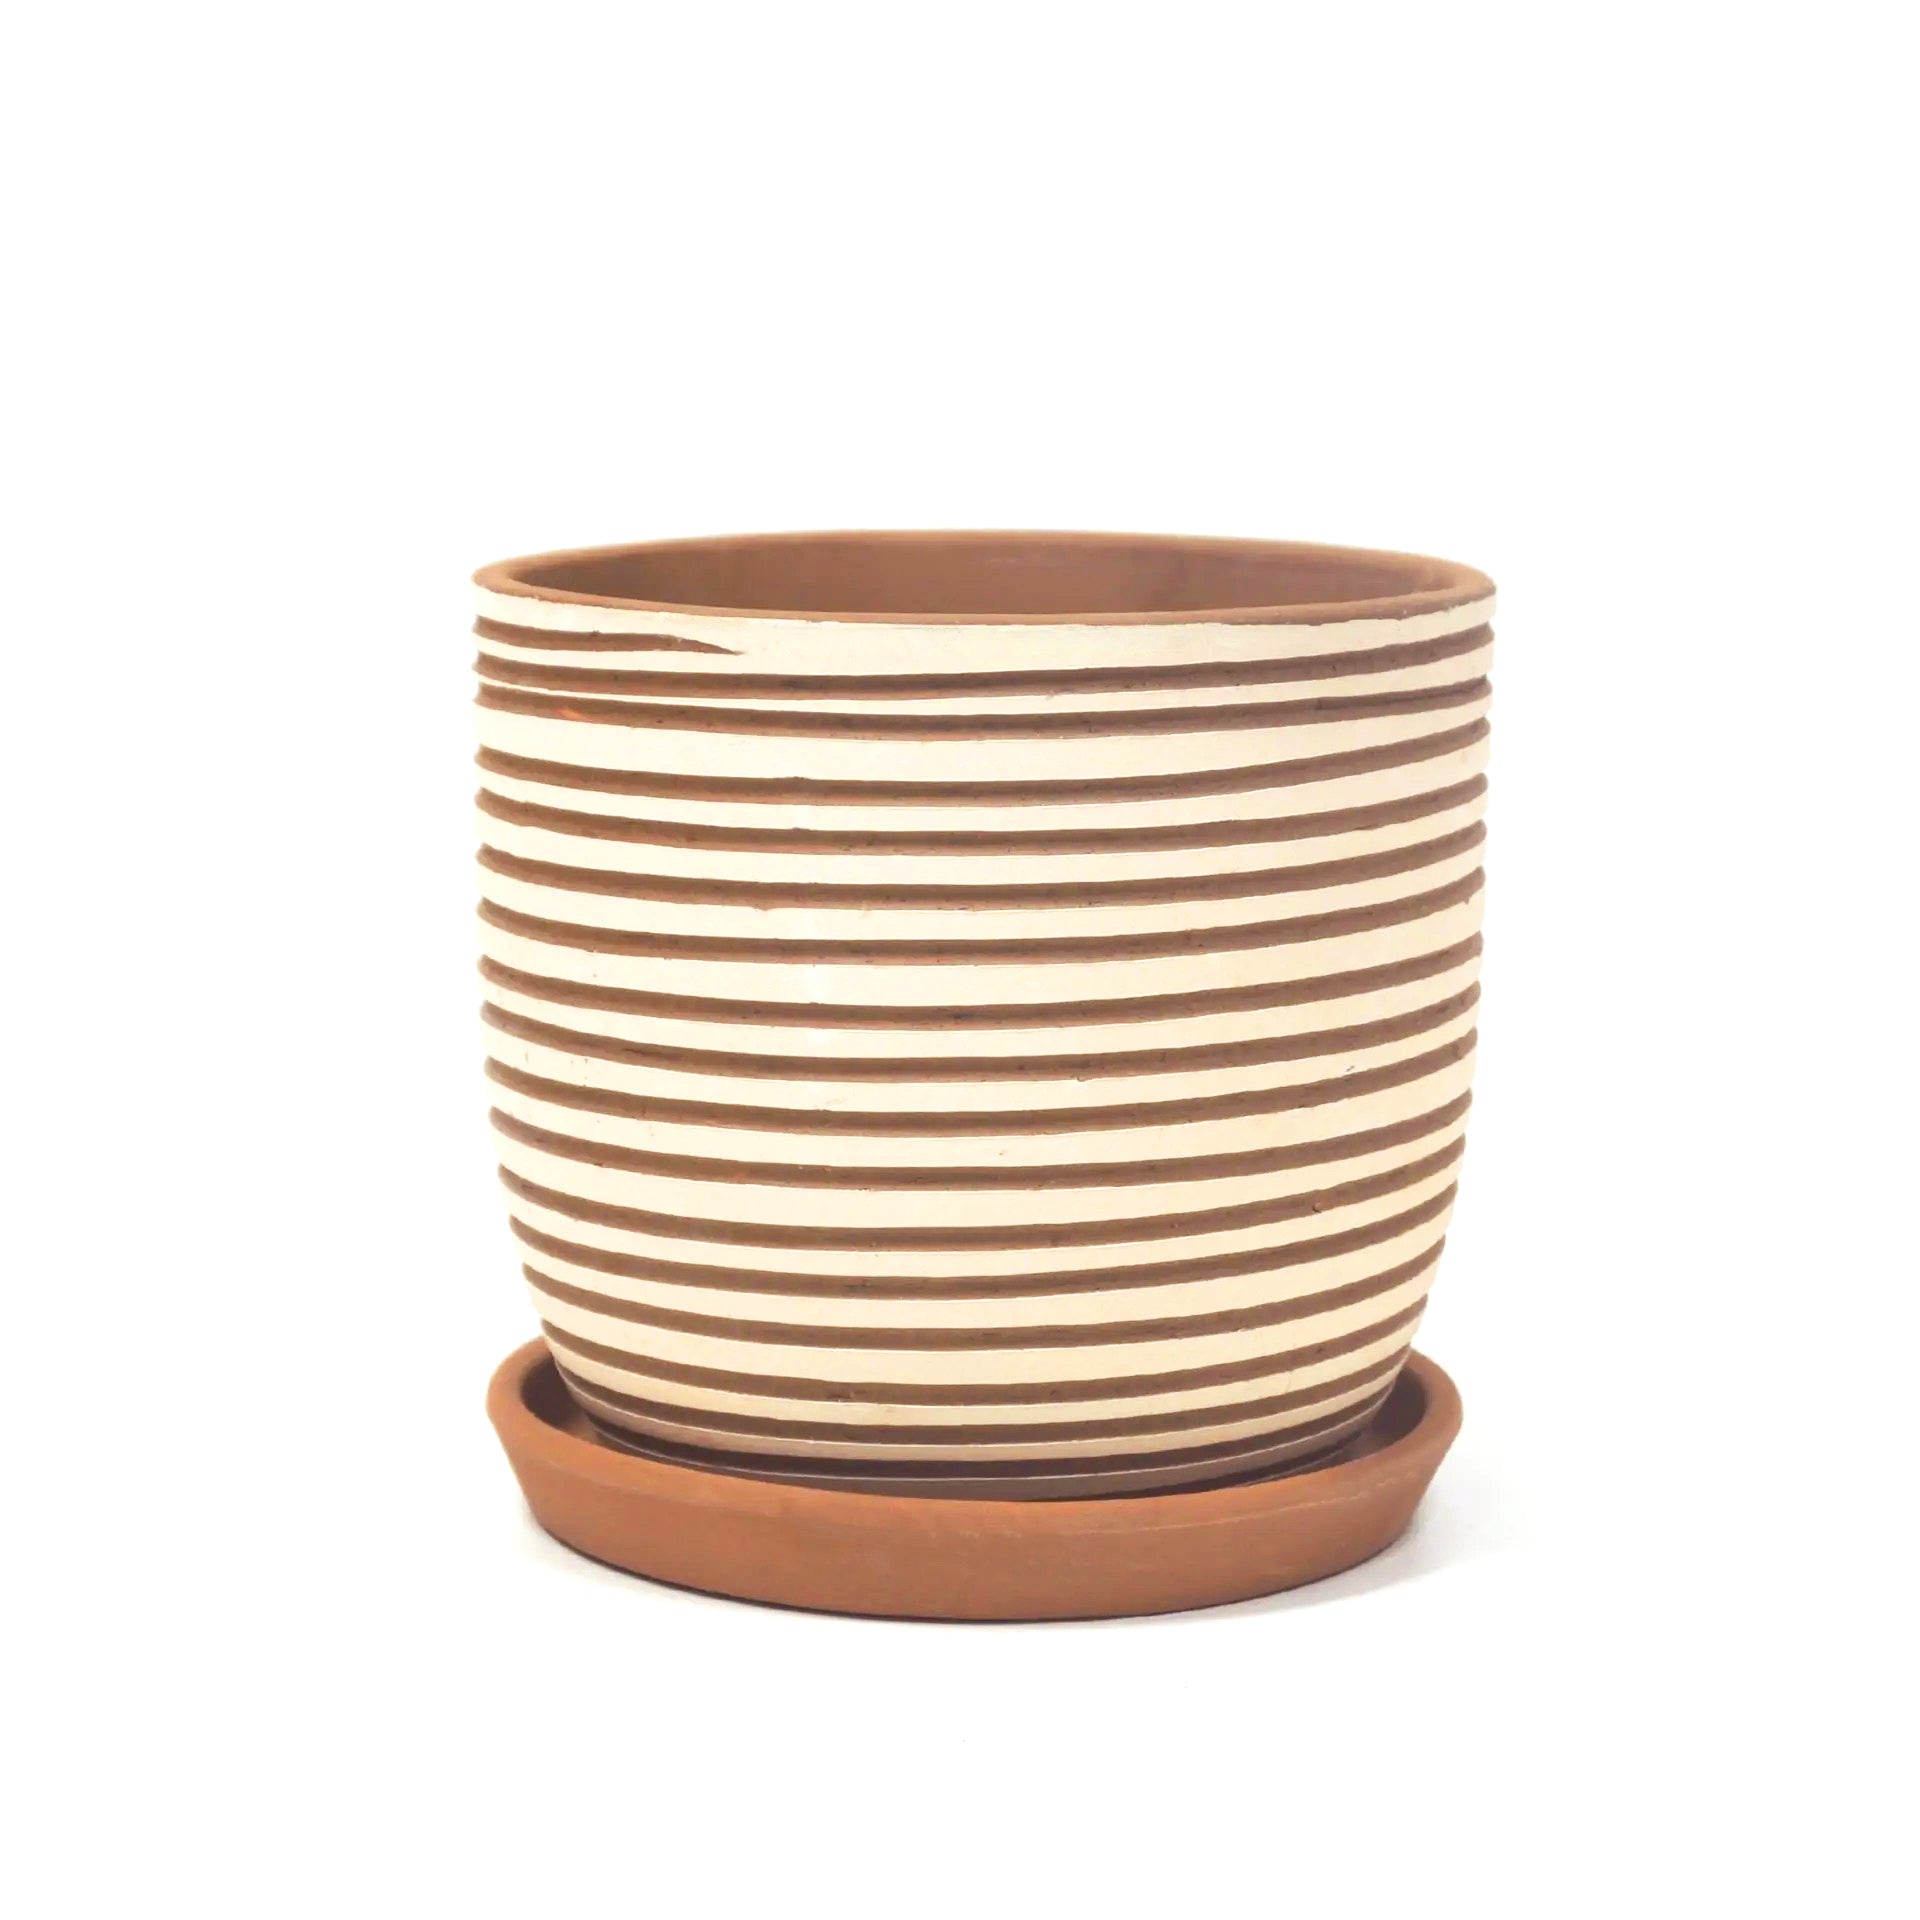 Clay White Stripes Pattern Pot for sale, Carved Stripes Terracotta Clay Pot for succulent and houseplant,  Decorative Terracotta Pot with Drainage Holes and Saucer for sale online